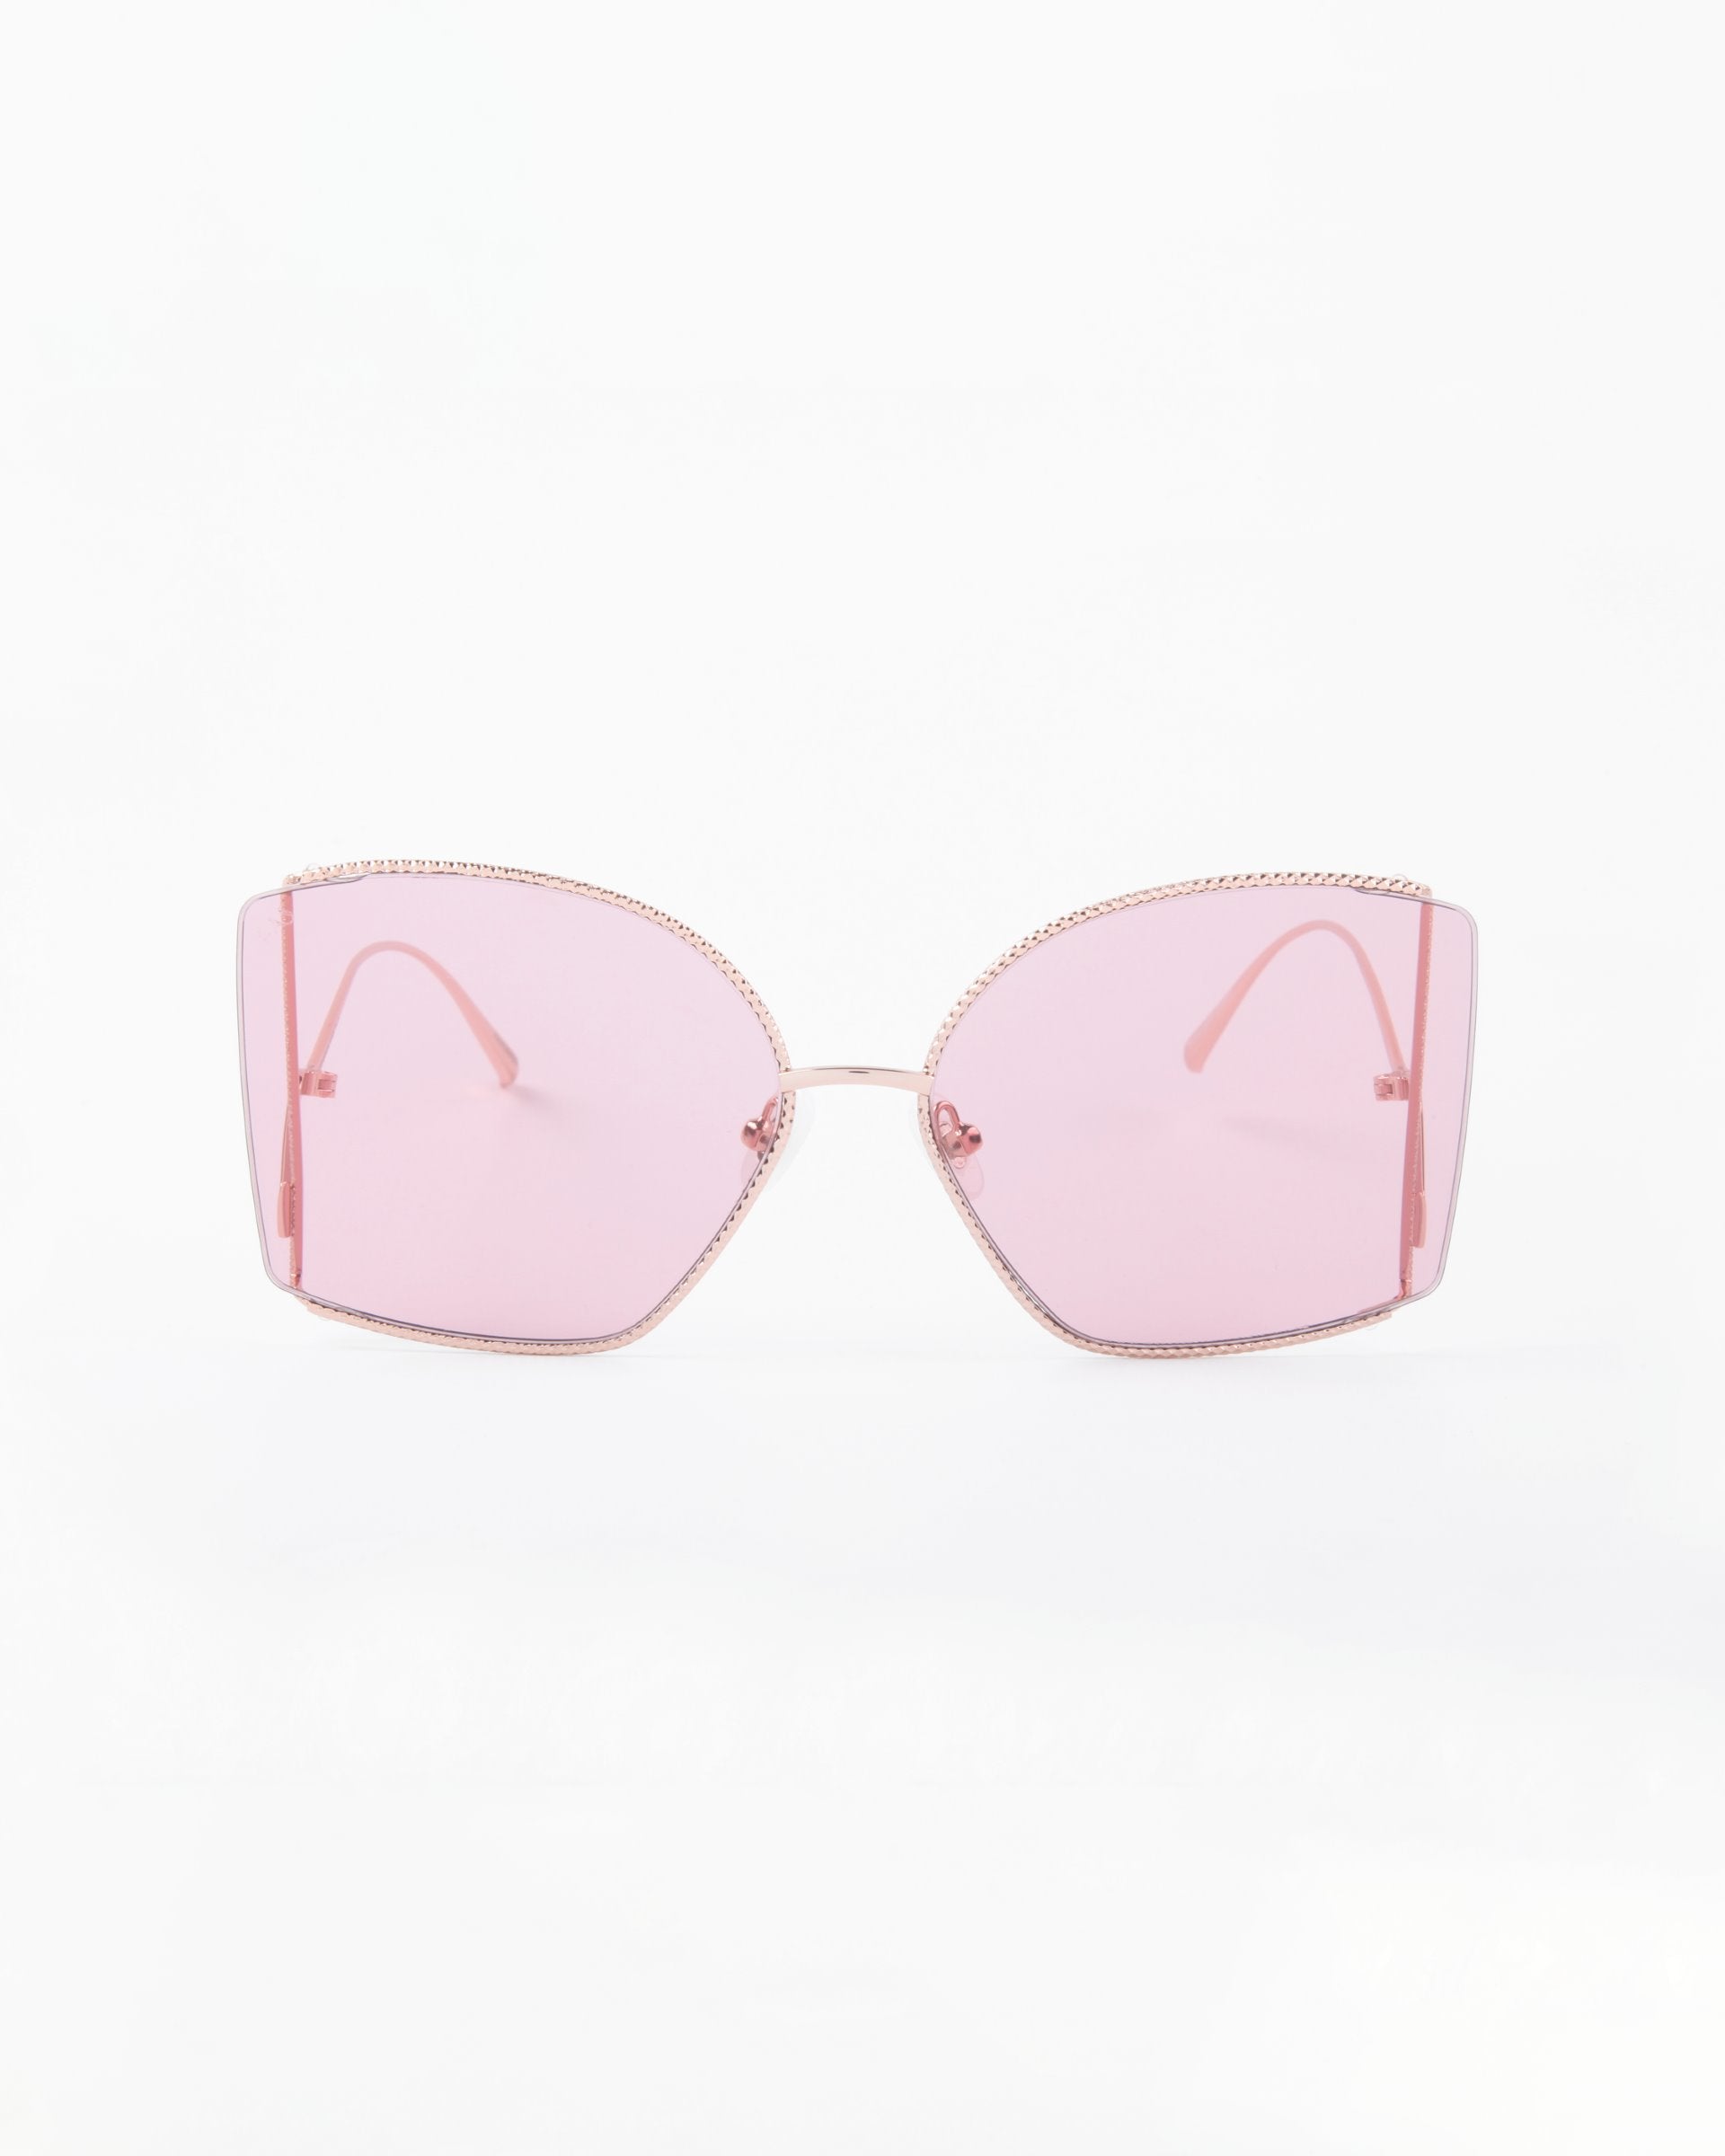 A pair of Dixie oversized, square-framed sunglasses with pink-tinted, shatter-resistant nylon lenses and thin, handmade gold-plated temples by For Art's Sake®. The design is minimalistic with a modern and stylish aesthetic that also offers UV protection. The background is plain white.